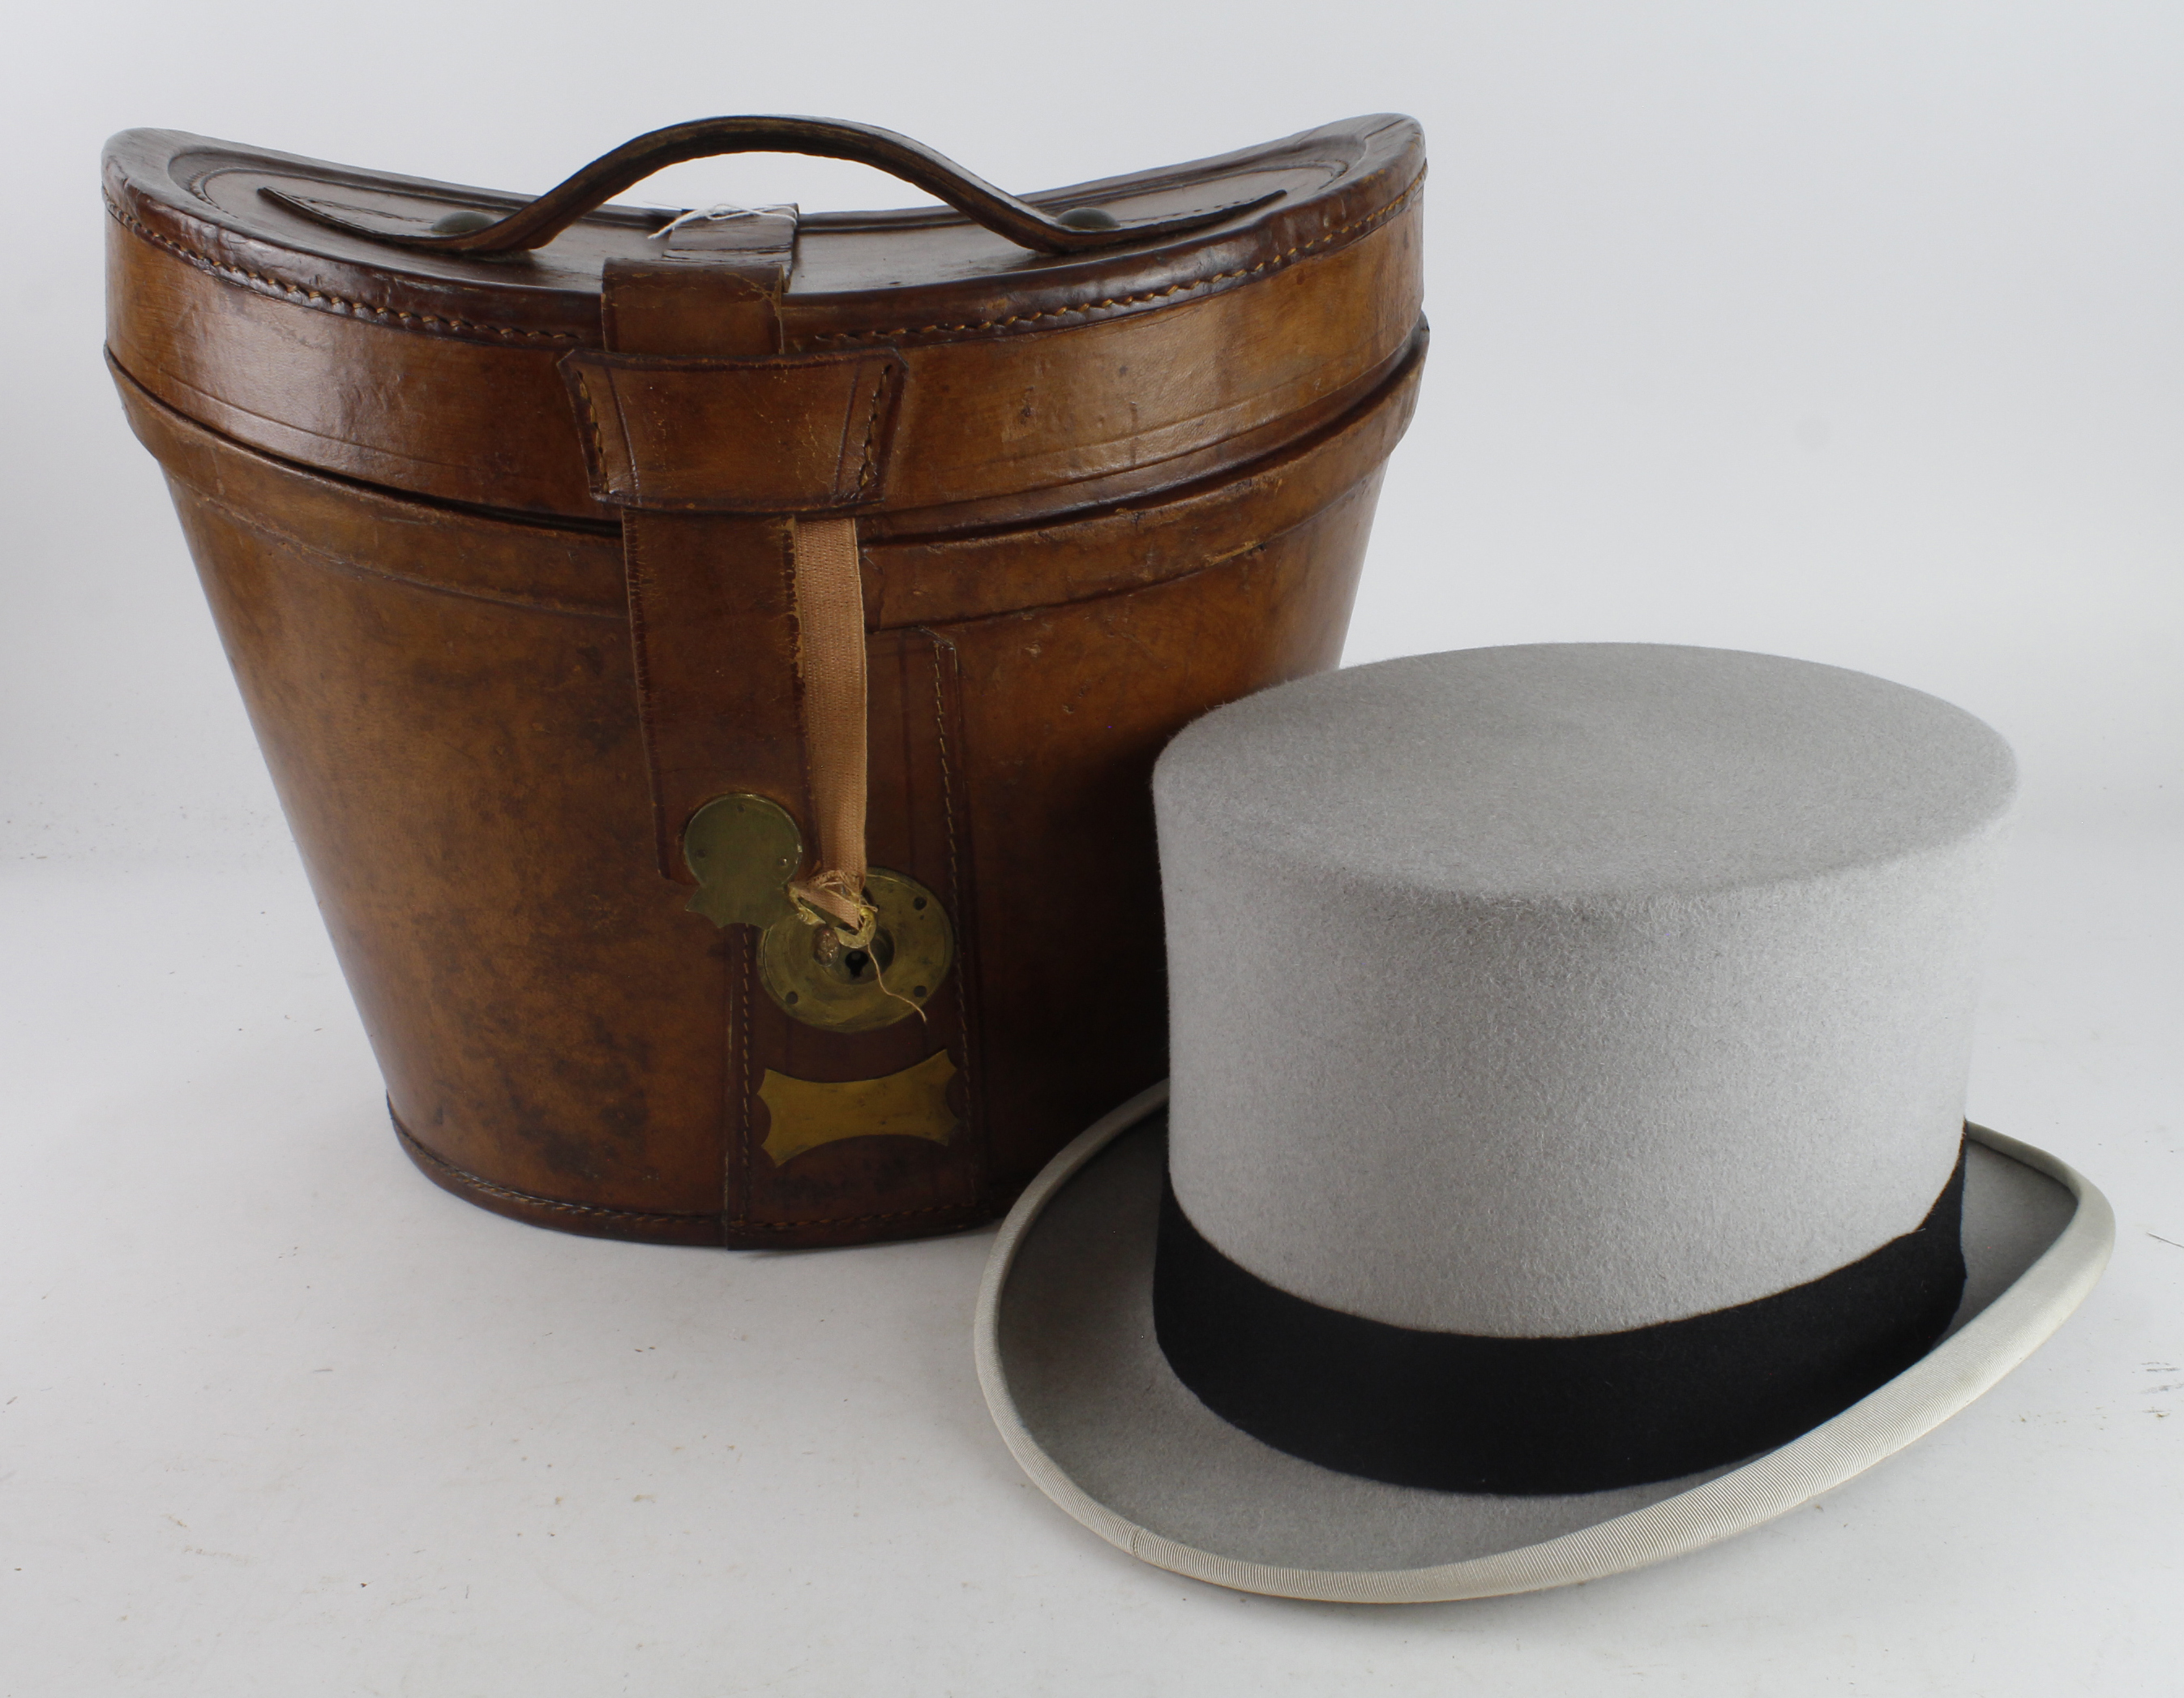 Top Hat. A grey top hat by Woodrow, Piccadilly, contained in contemporary leather hat box, head size